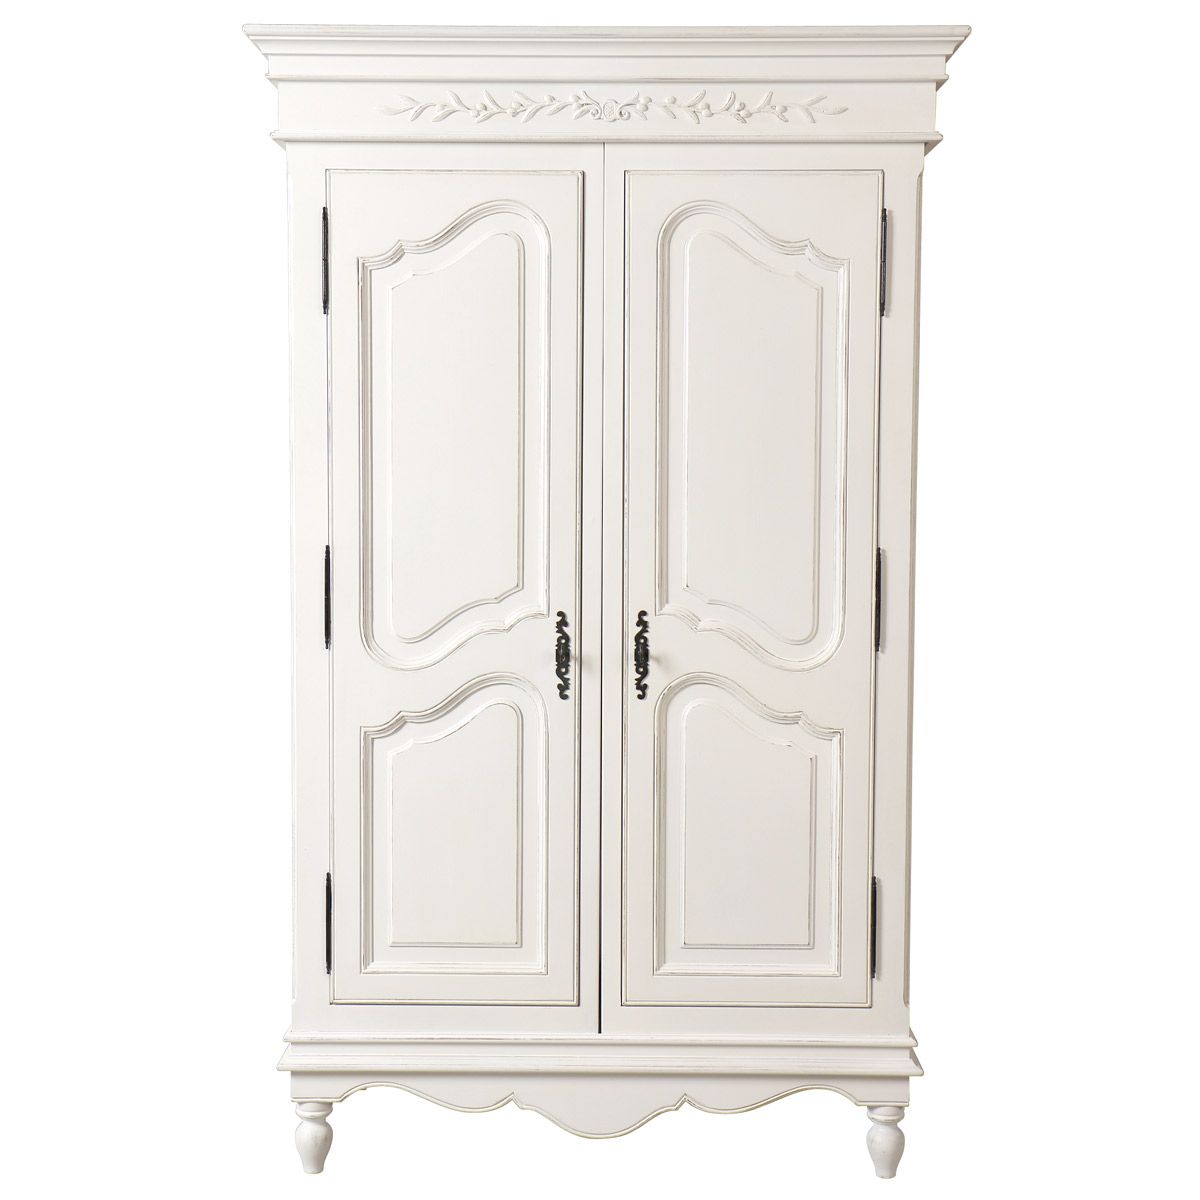 French Armoire Wardrobe – Romance – Low Cost Delivery, Nationwide Throughout French Armoires Wardrobes (View 9 of 20)